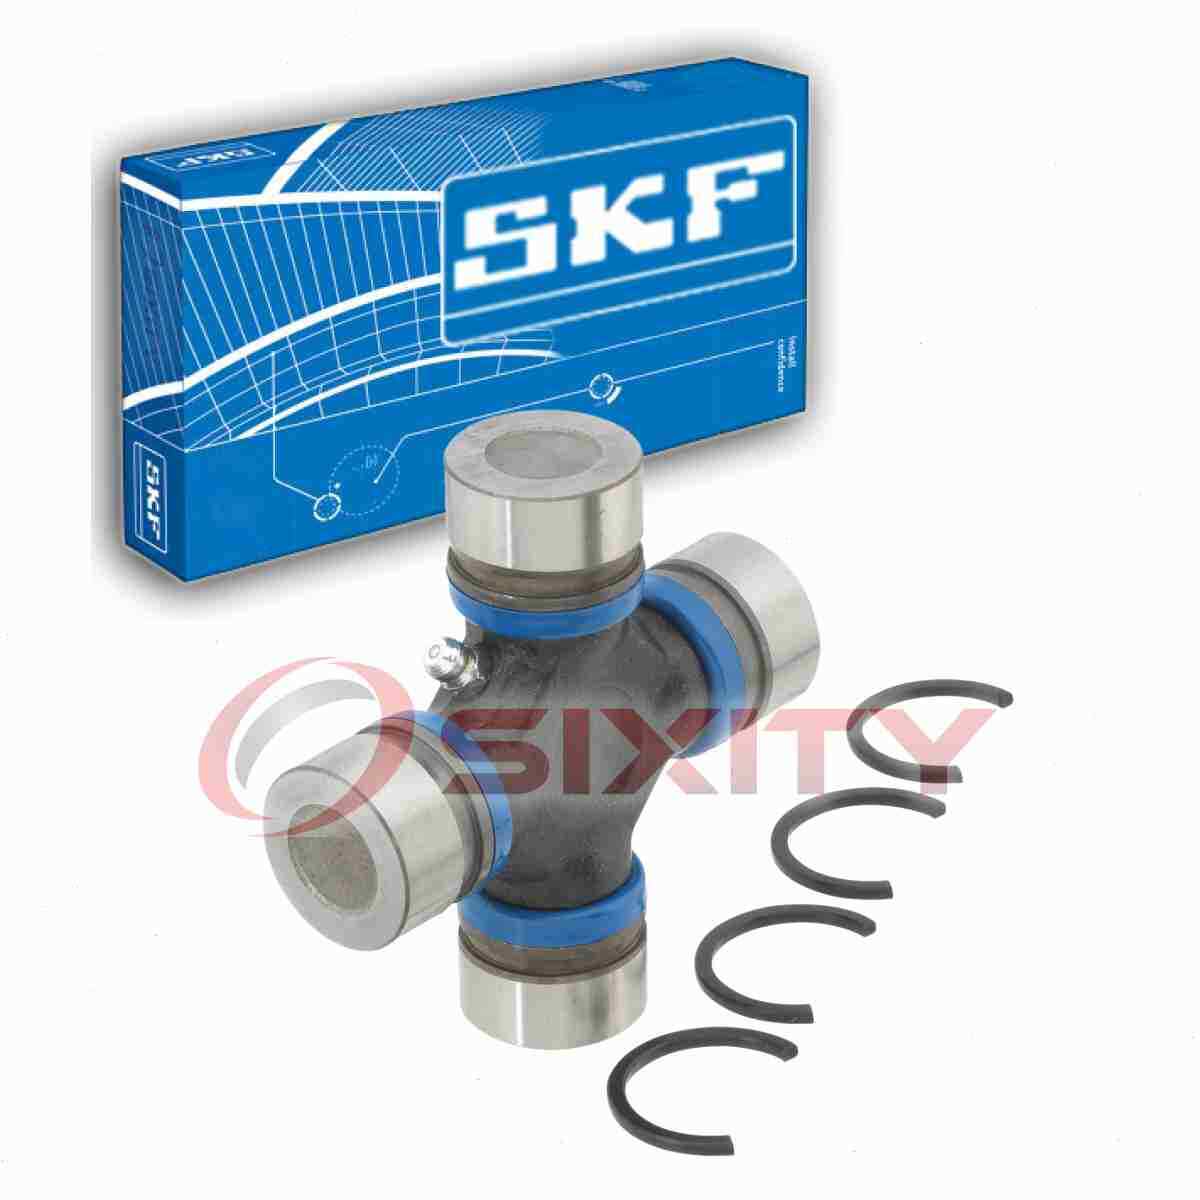 SKF Front Universal Joint for 1975-1980 Oldsmobile Cutlass Salon Driveline ym